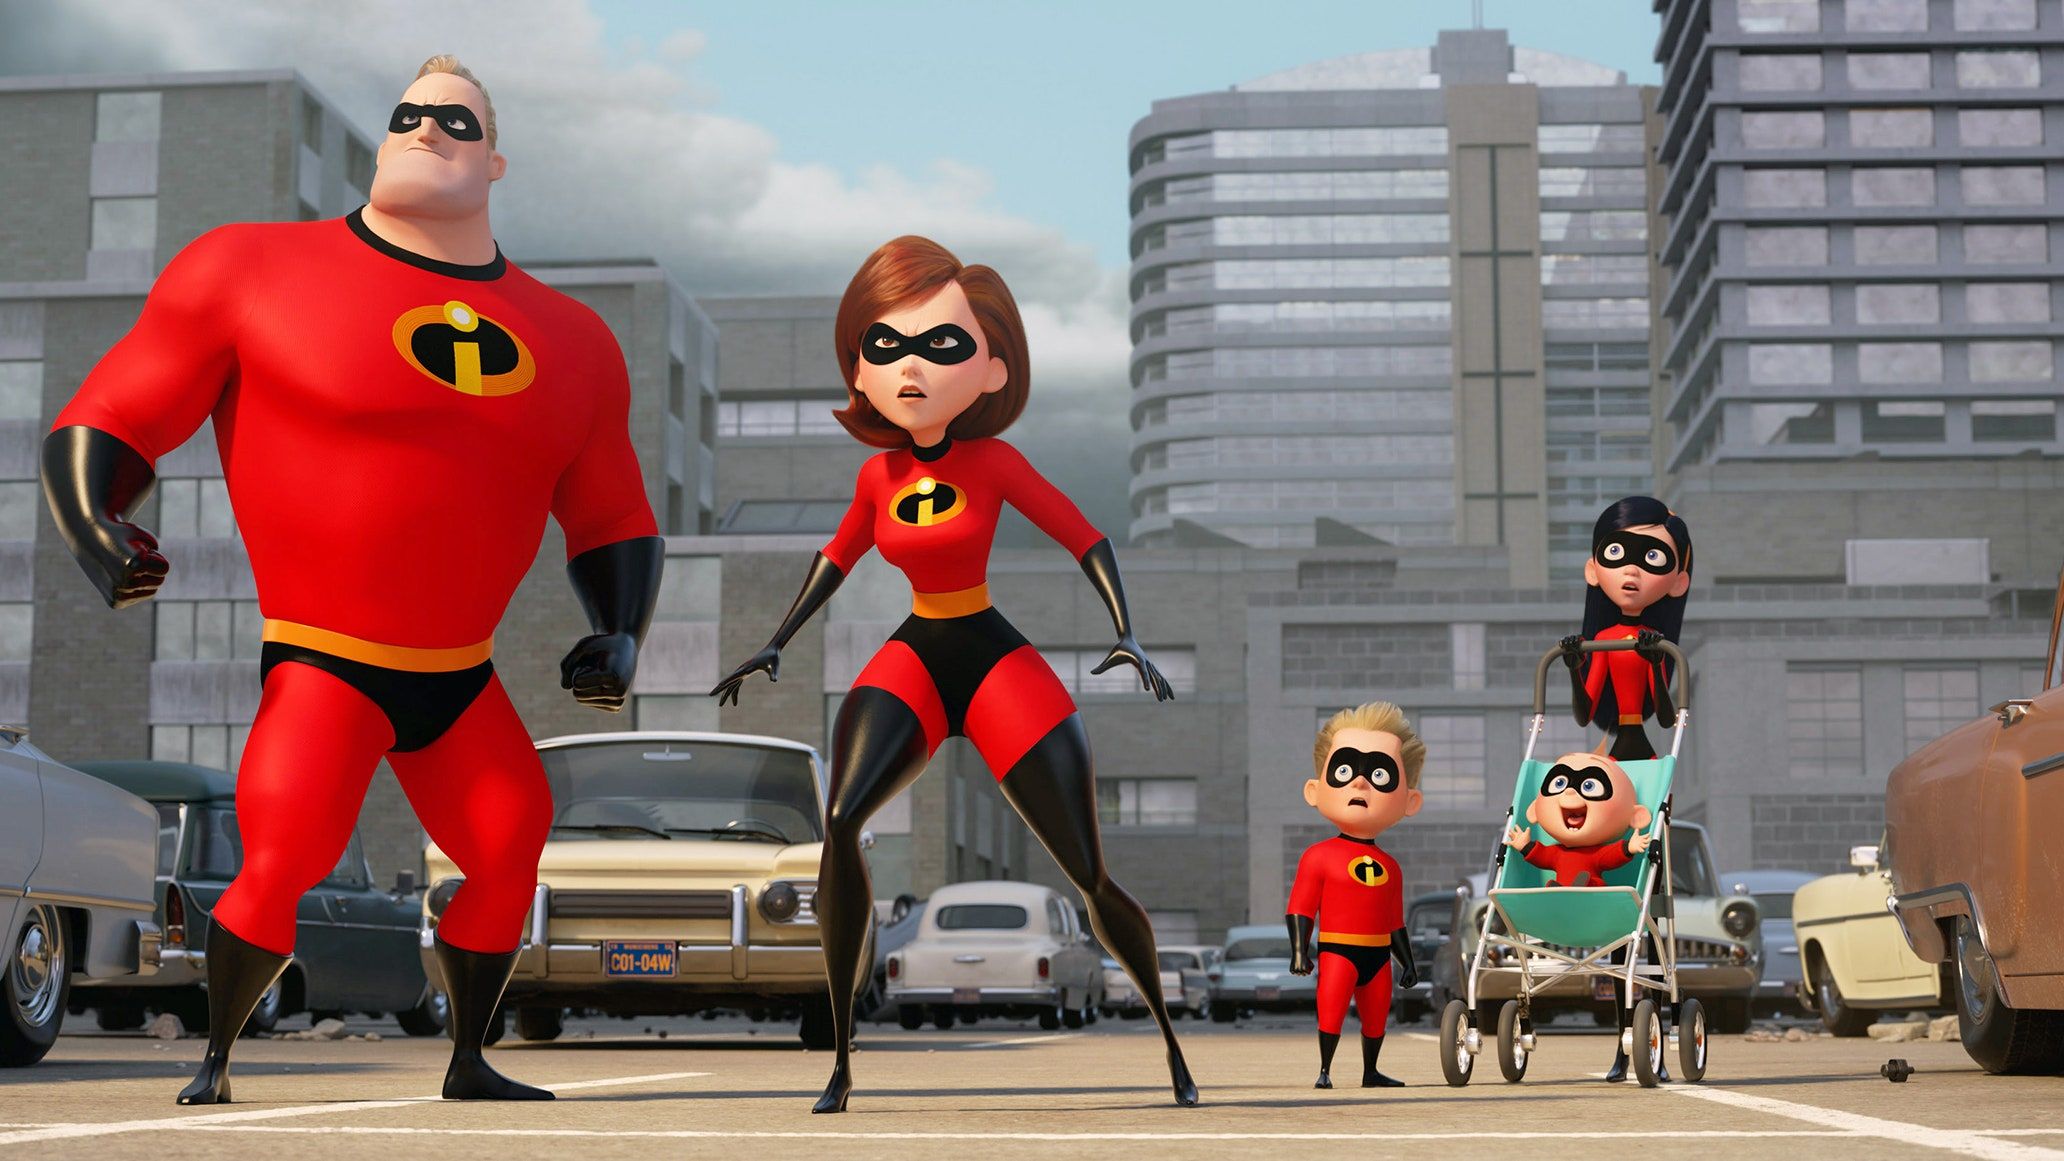 the-incredibles